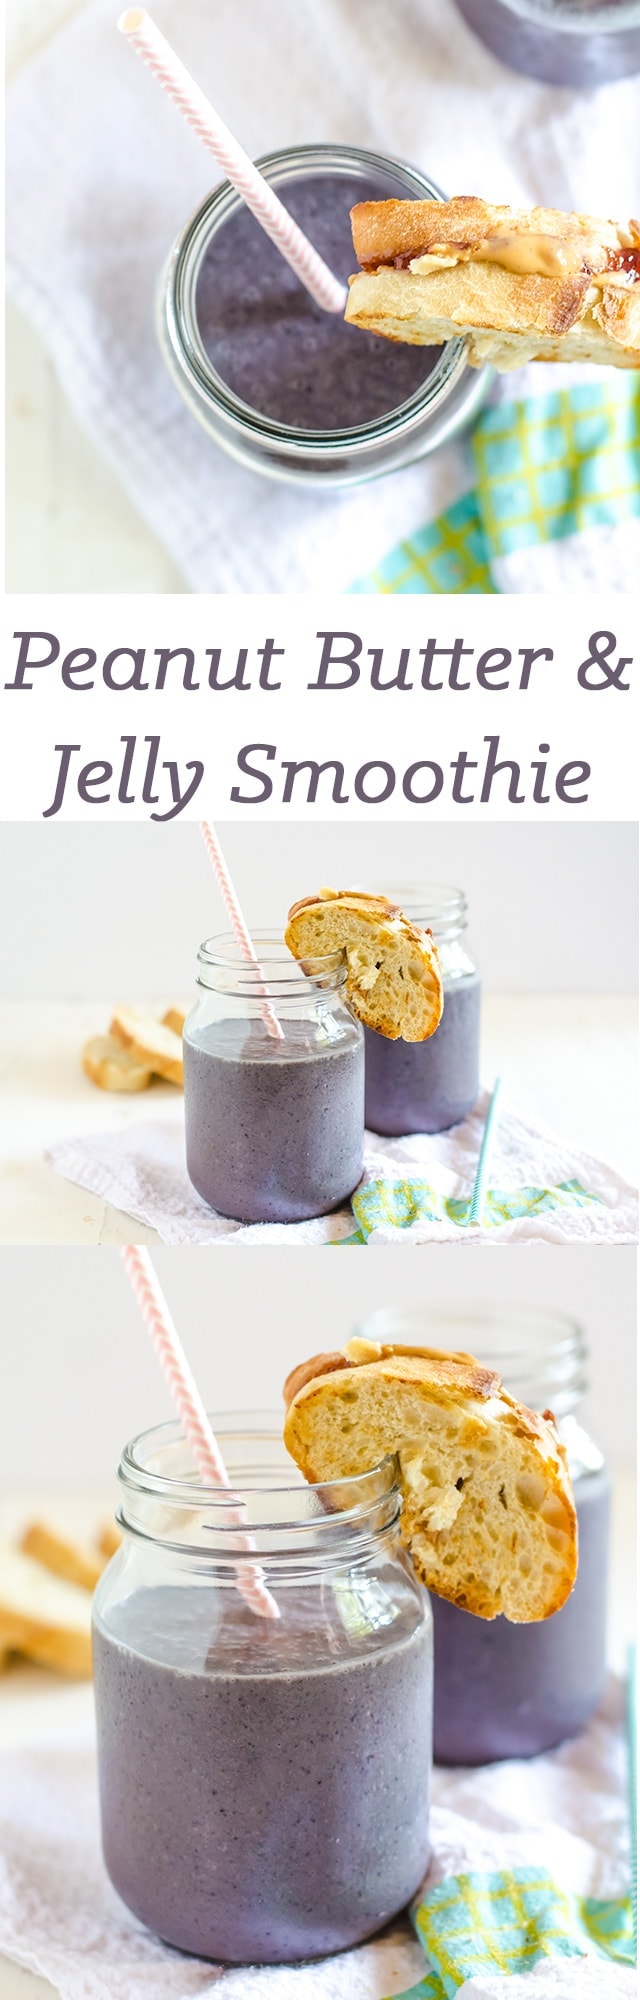 Peanut butter and jelly smoothie